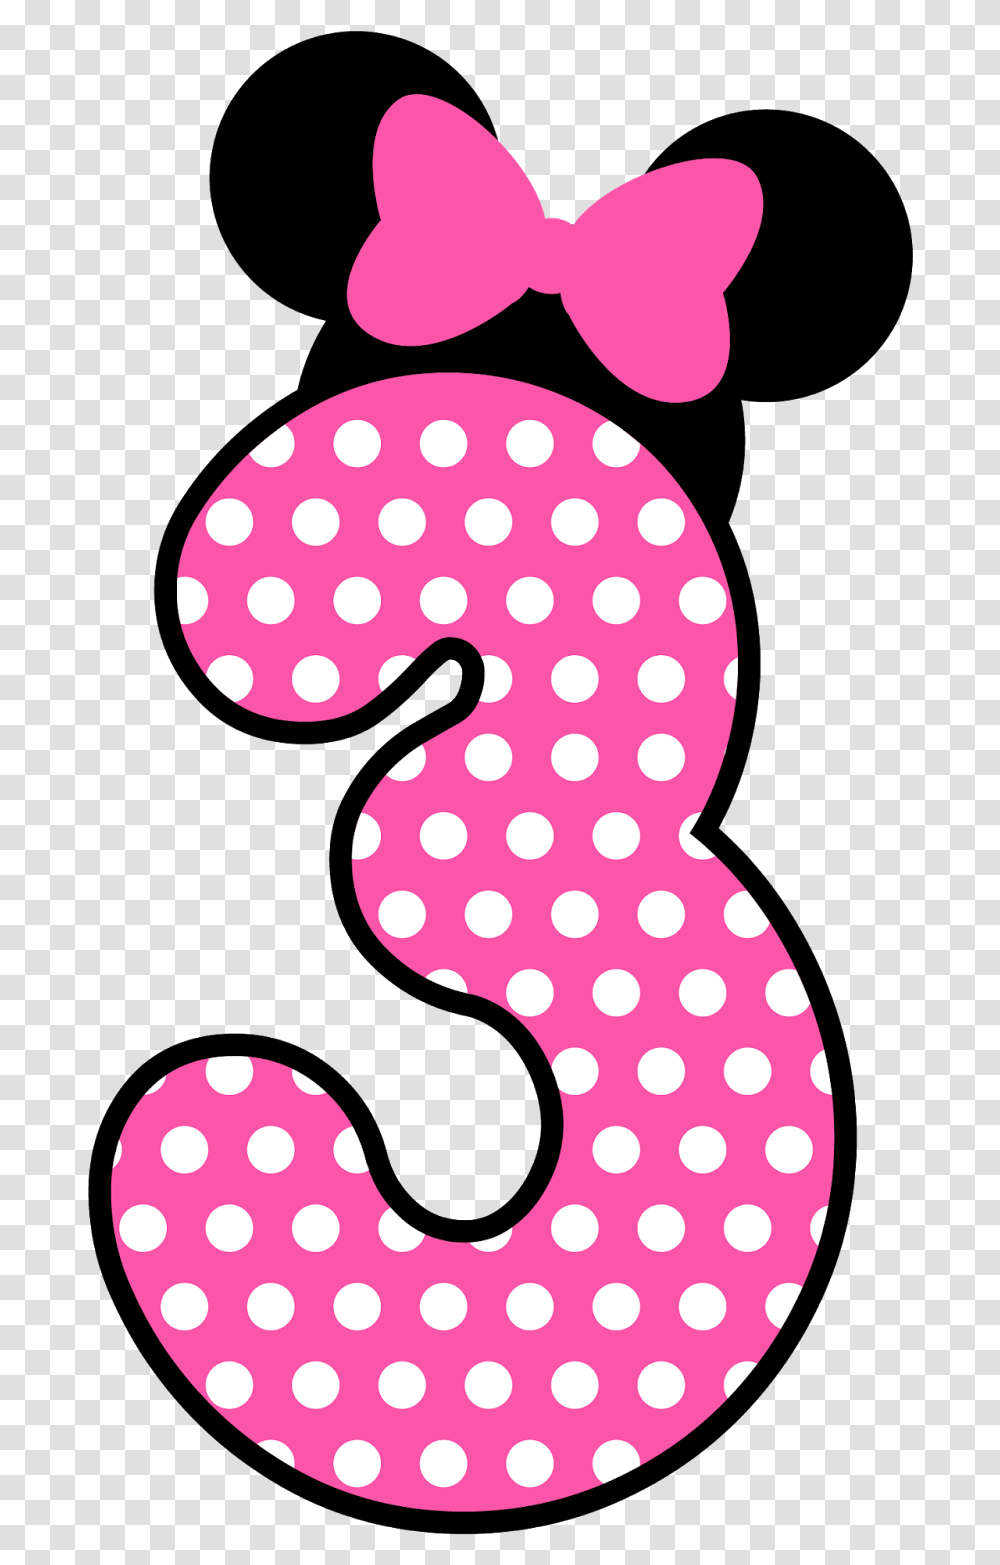 Minnie Rosa 3 Imagens Minnie Mouse Number, Texture, Polka Dot, White, Label Transparent Png